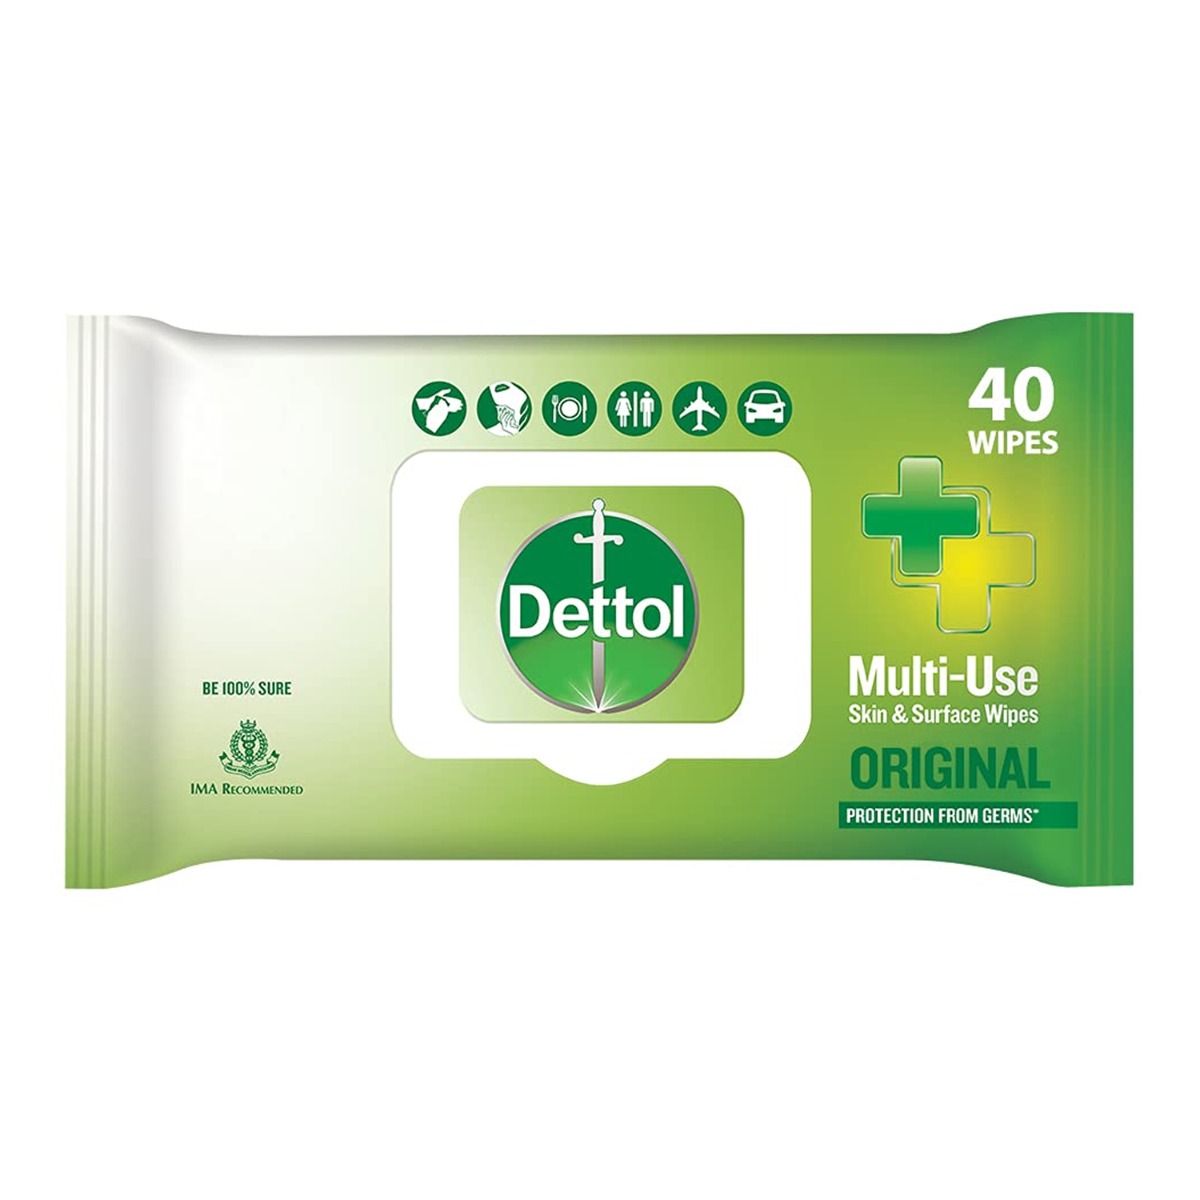 Dettol Orignal Disinfectant Skin & Surface Wipes, 40 Wipes